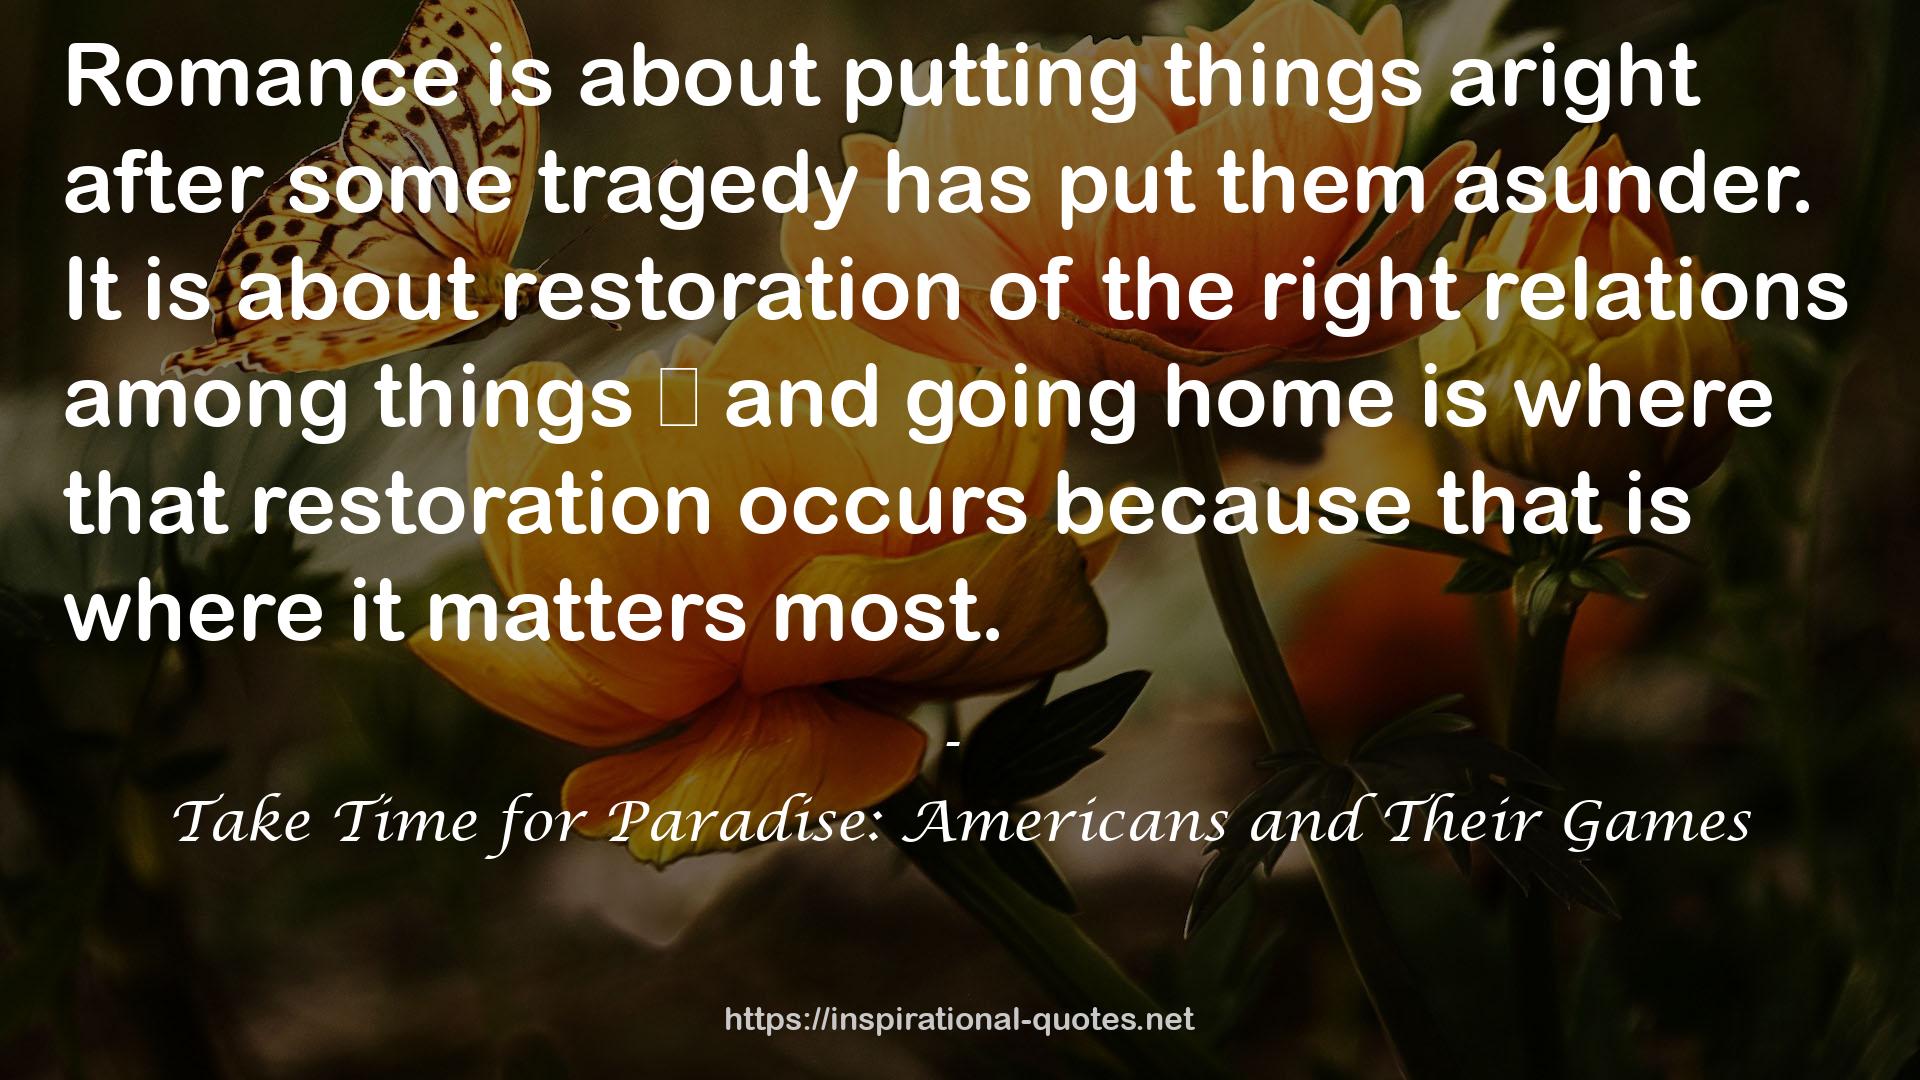 Take Time for Paradise: Americans and Their Games QUOTES